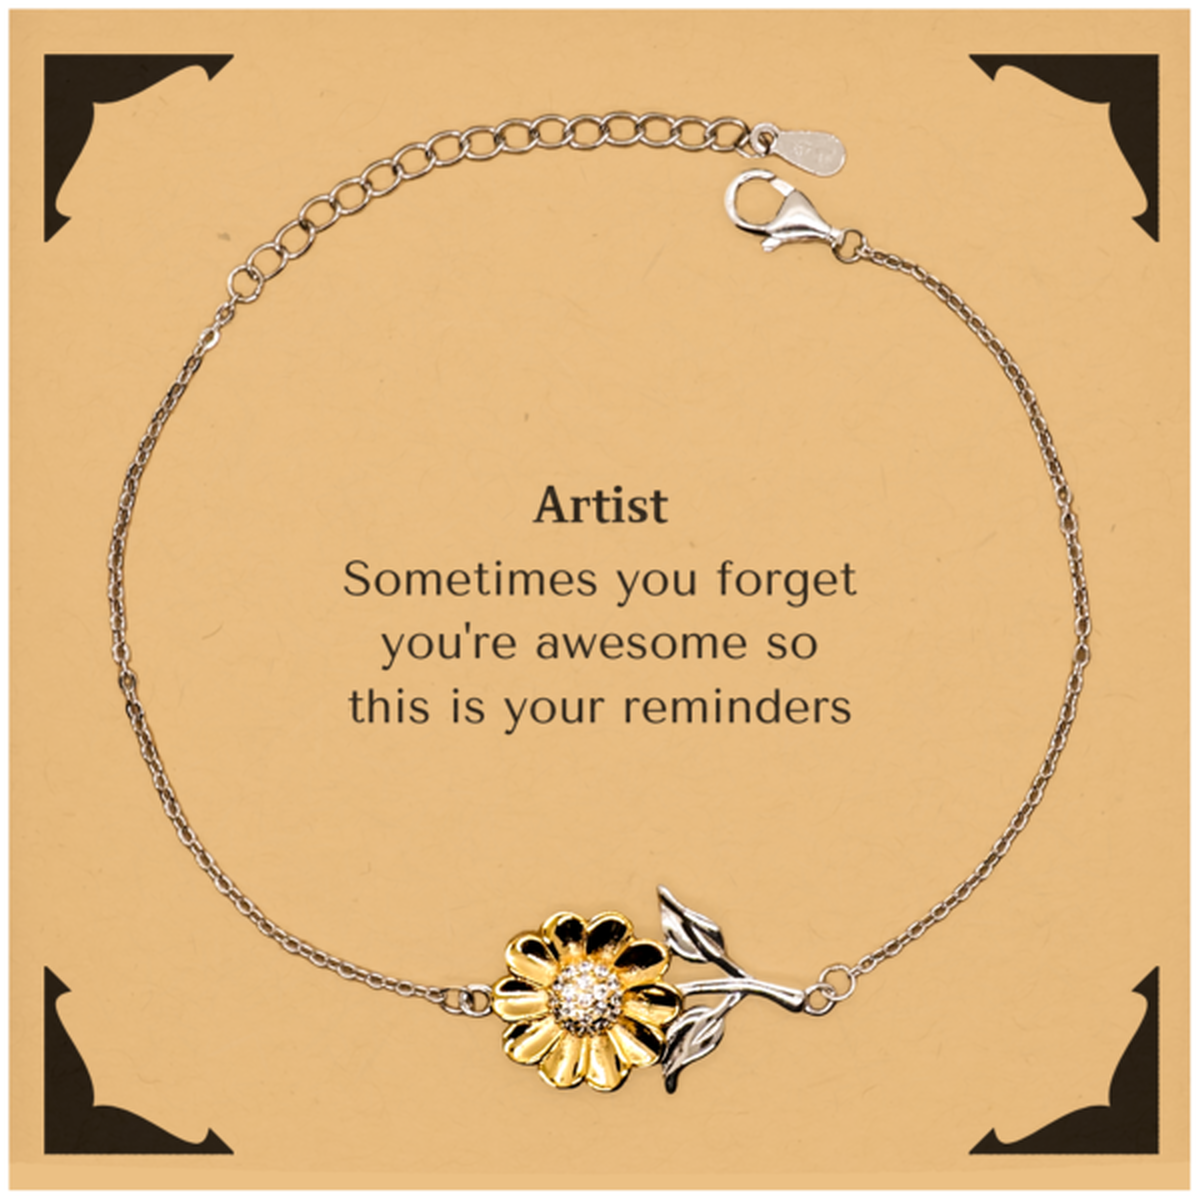 Sentimental Artist Sunflower Bracelet, Artist Sometimes you forget you're awesome so this is your reminders, Graduation Christmas Birthday Gifts for Artist, Men, Women, Coworkers